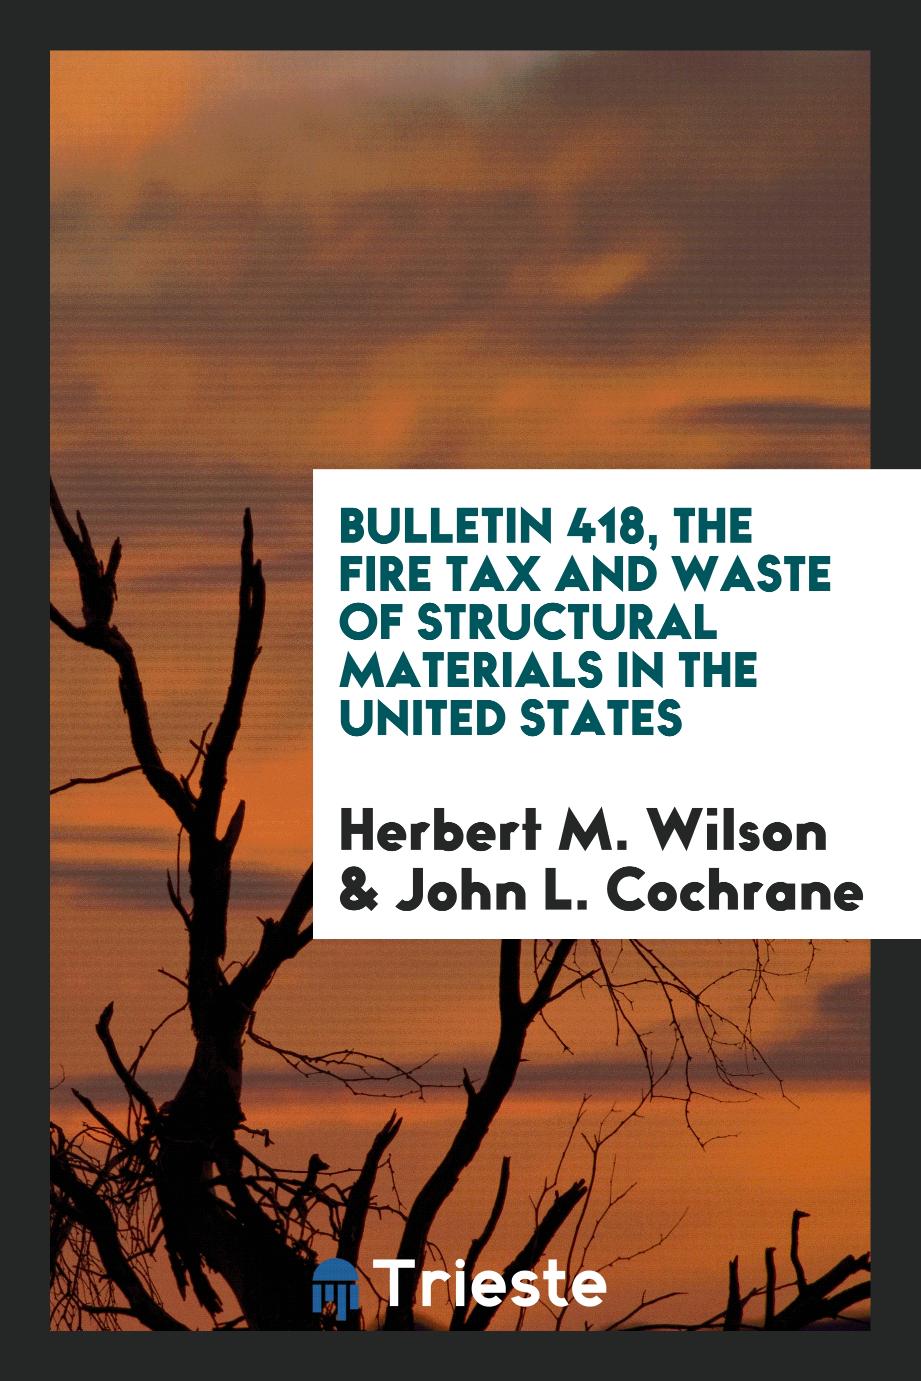 Bulletin 418, The fire tax and waste of structural materials in the united states